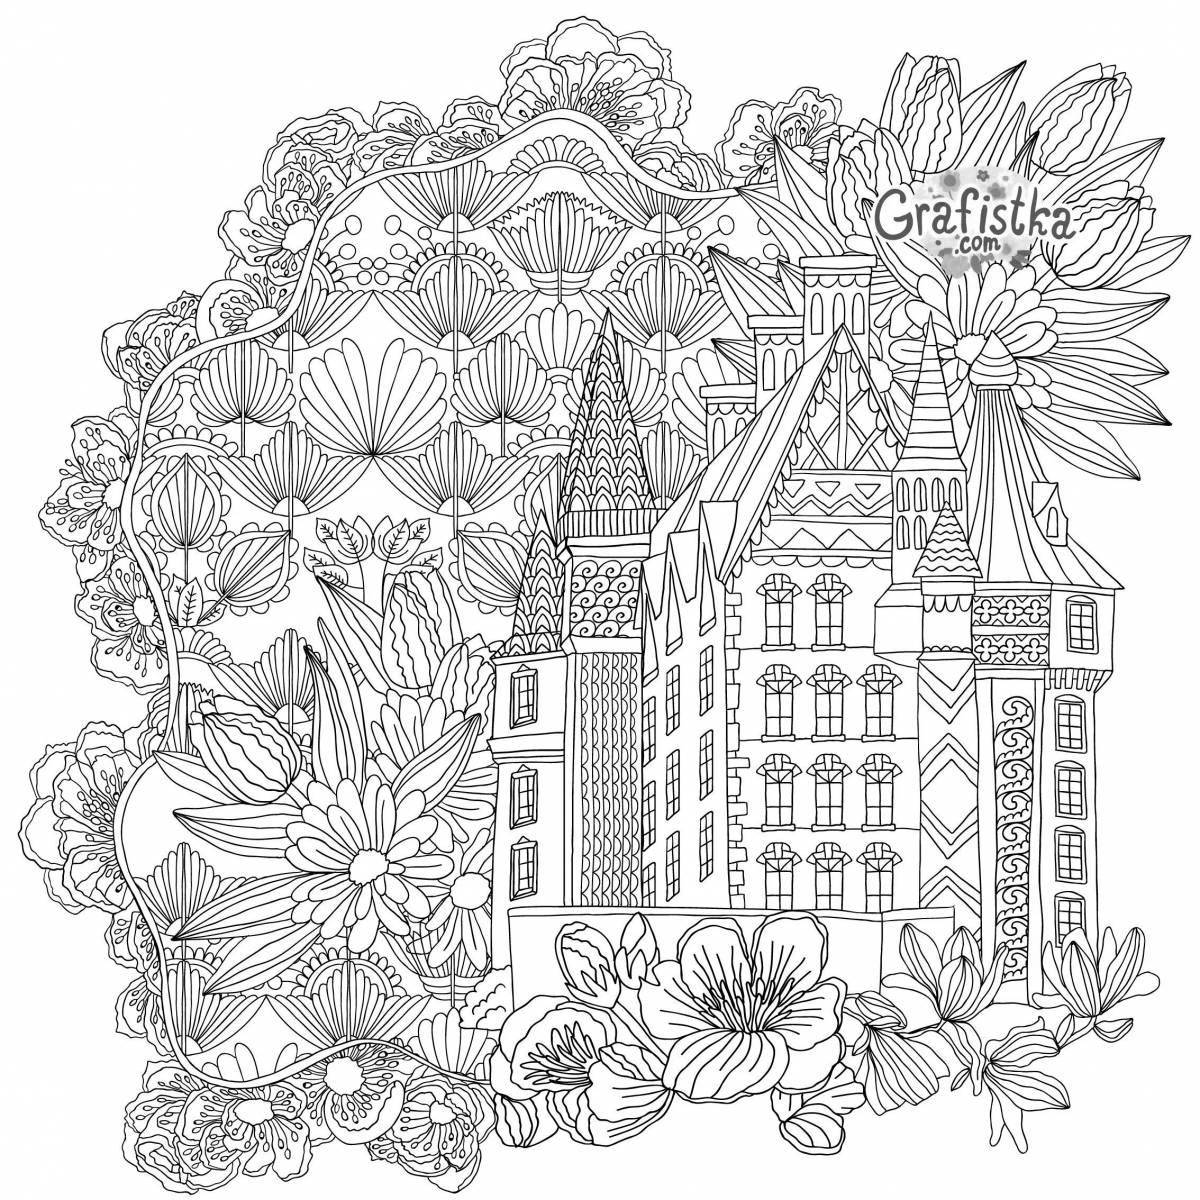 Coloring book peaceful city antistress